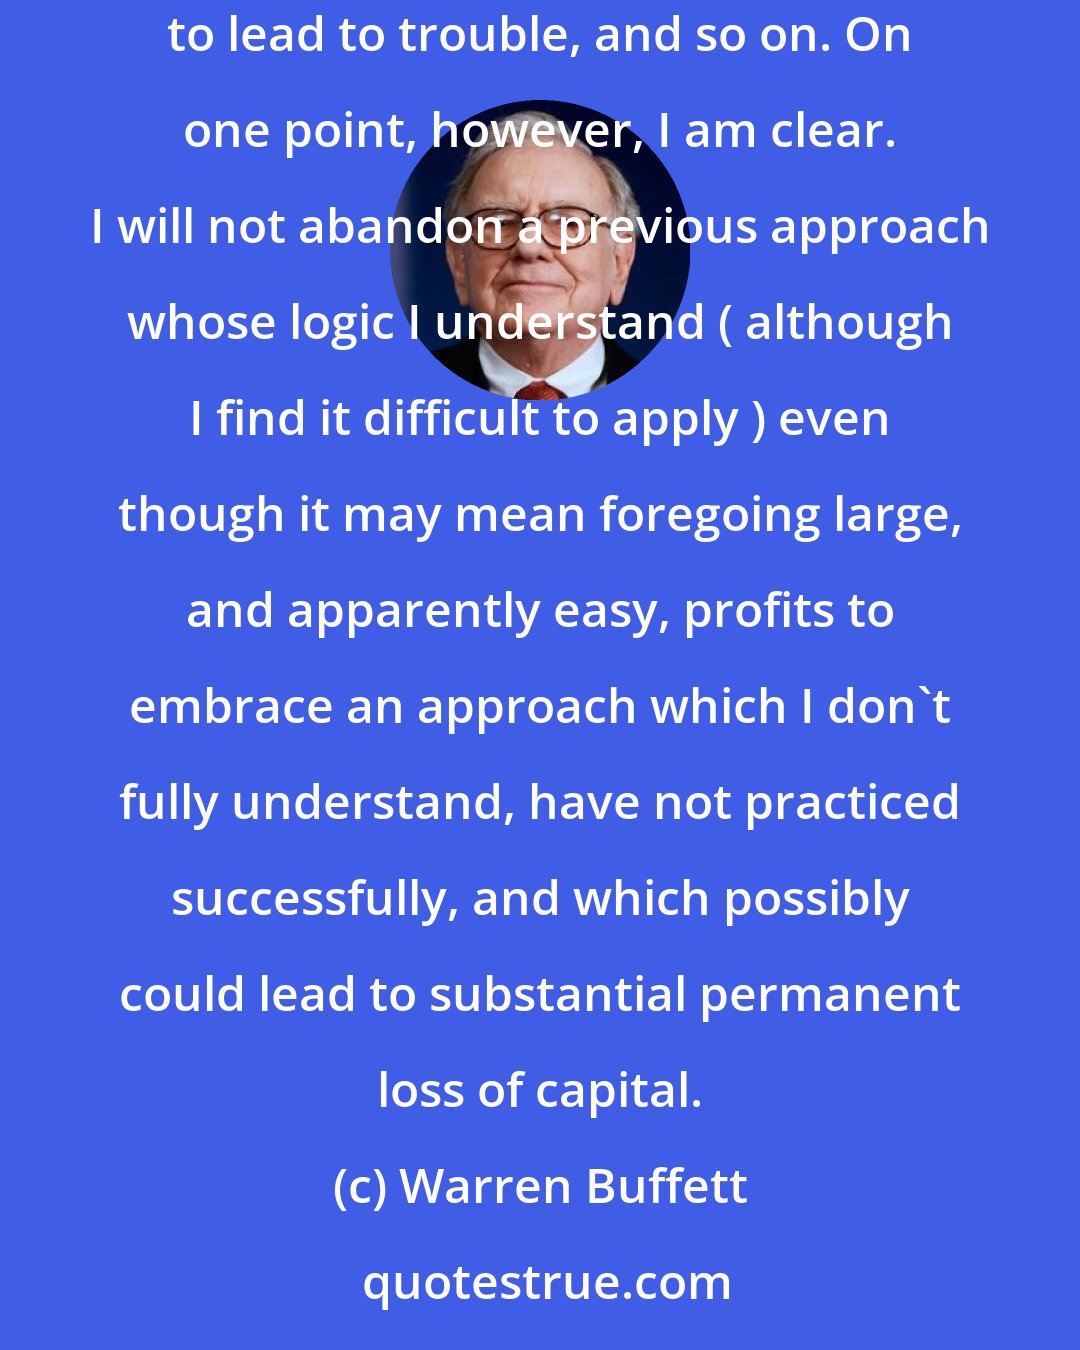 Warren Buffett: I am out of step with present conditions. When the game is no longer played your way, it is only human to say the new approach is all wrong, bound to lead to trouble, and so on. On one point, however, I am clear. I will not abandon a previous approach whose logic I understand ( although I find it difficult to apply ) even though it may mean foregoing large, and apparently easy, profits to embrace an approach which I don't fully understand, have not practiced successfully, and which possibly could lead to substantial permanent loss of capital.